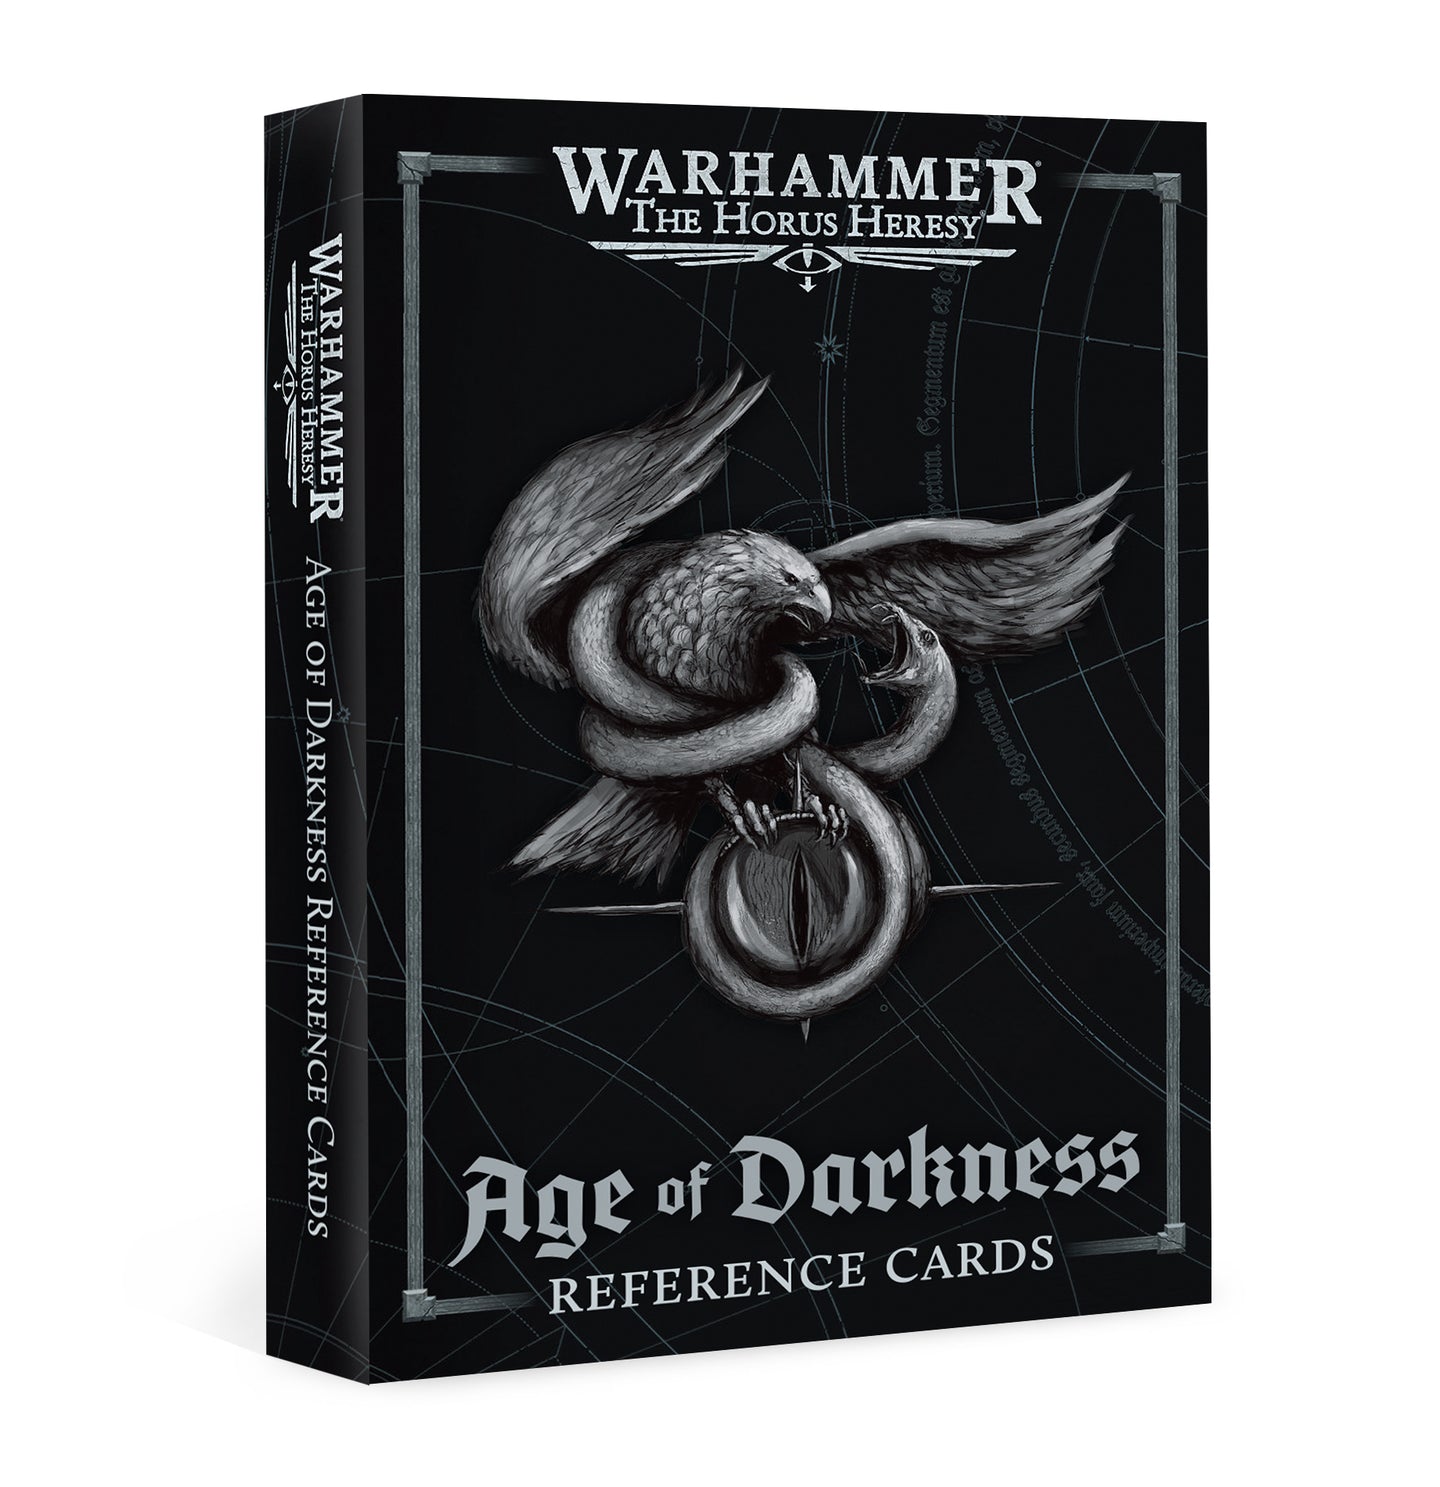 The Horus Heresy – Age of Darkness Reference Cards